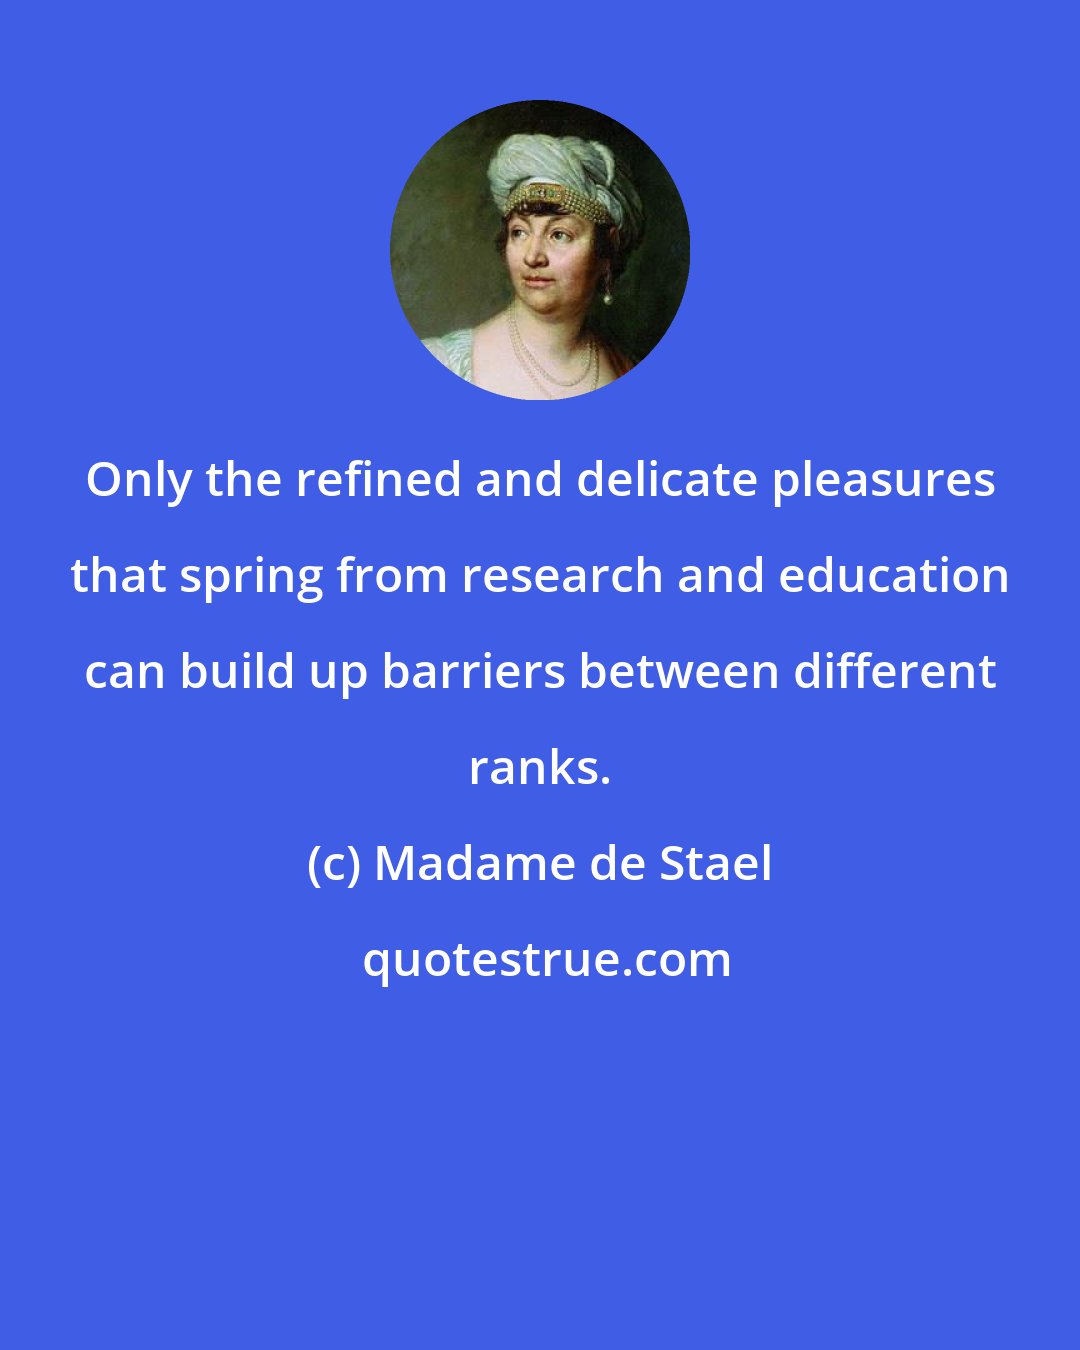 Madame de Stael: Only the refined and delicate pleasures that spring from research and education can build up barriers between different ranks.